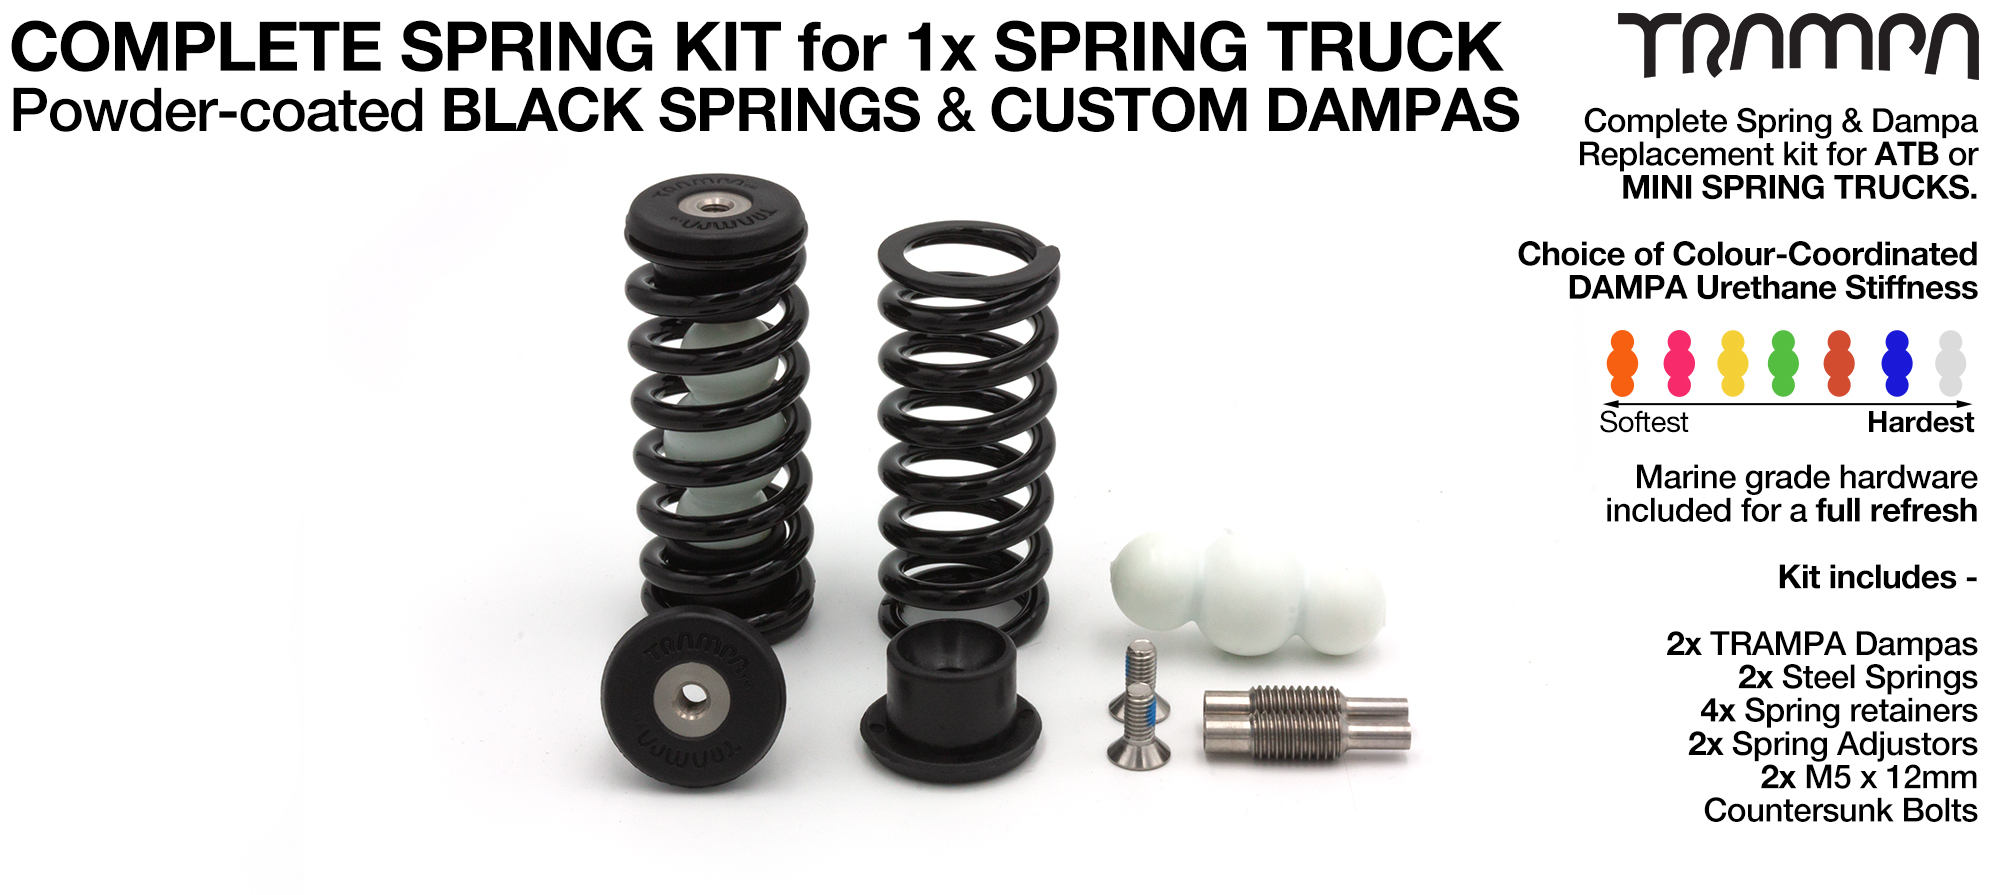 Spring kit Complete for 1x Truck - 2x Spring 2x Dampa 4x Spring Retainers 2x Spring Adjuster & 2 M5x12mm Countersunk Bolt  BLACK Springs 